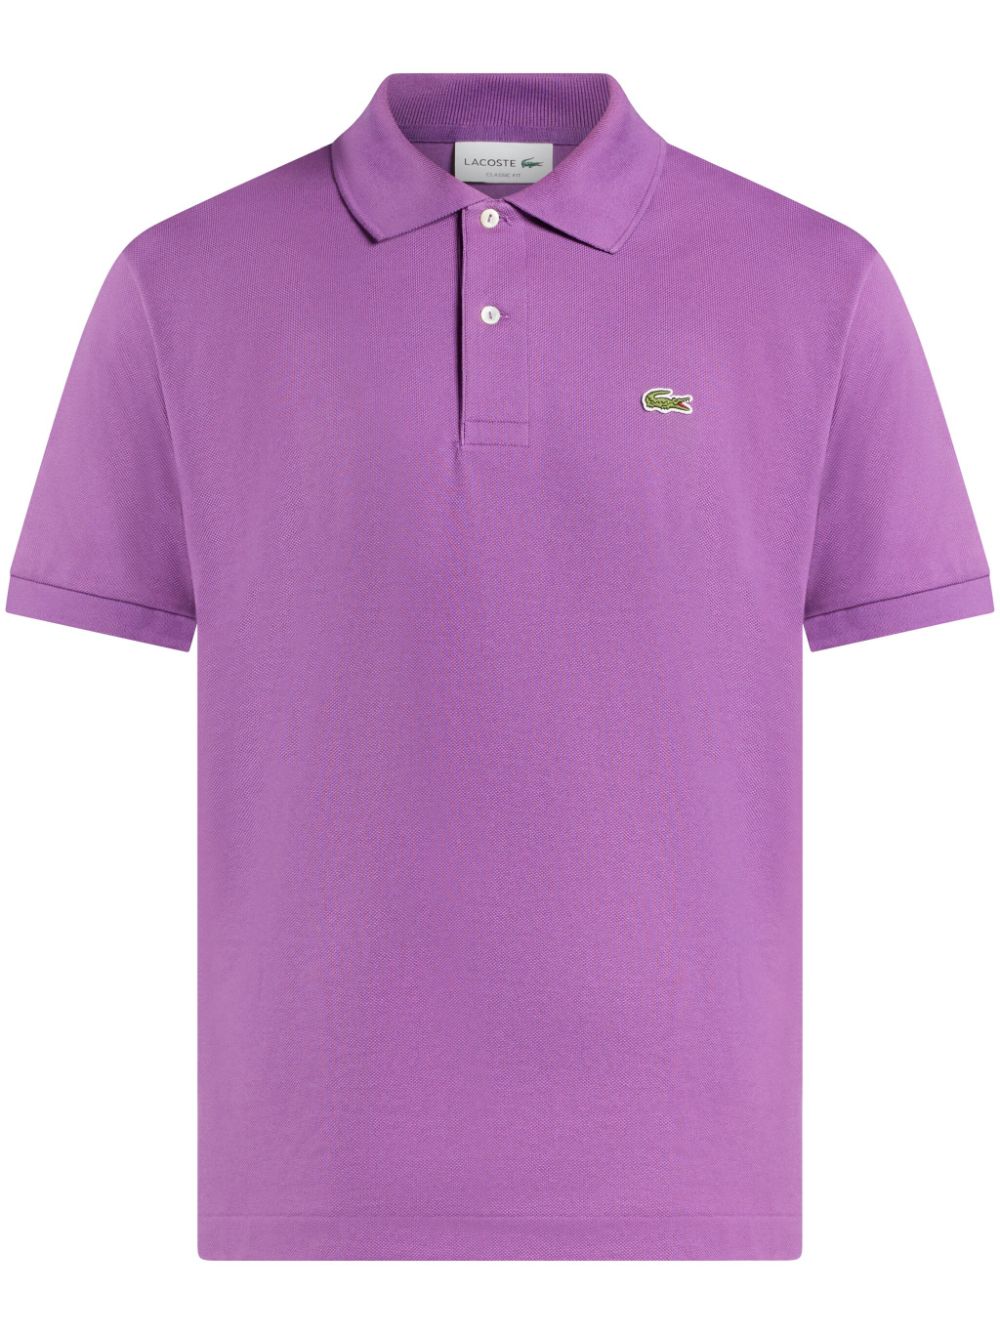 Lacoste logo-embroidered cotton polo shirt - Violett